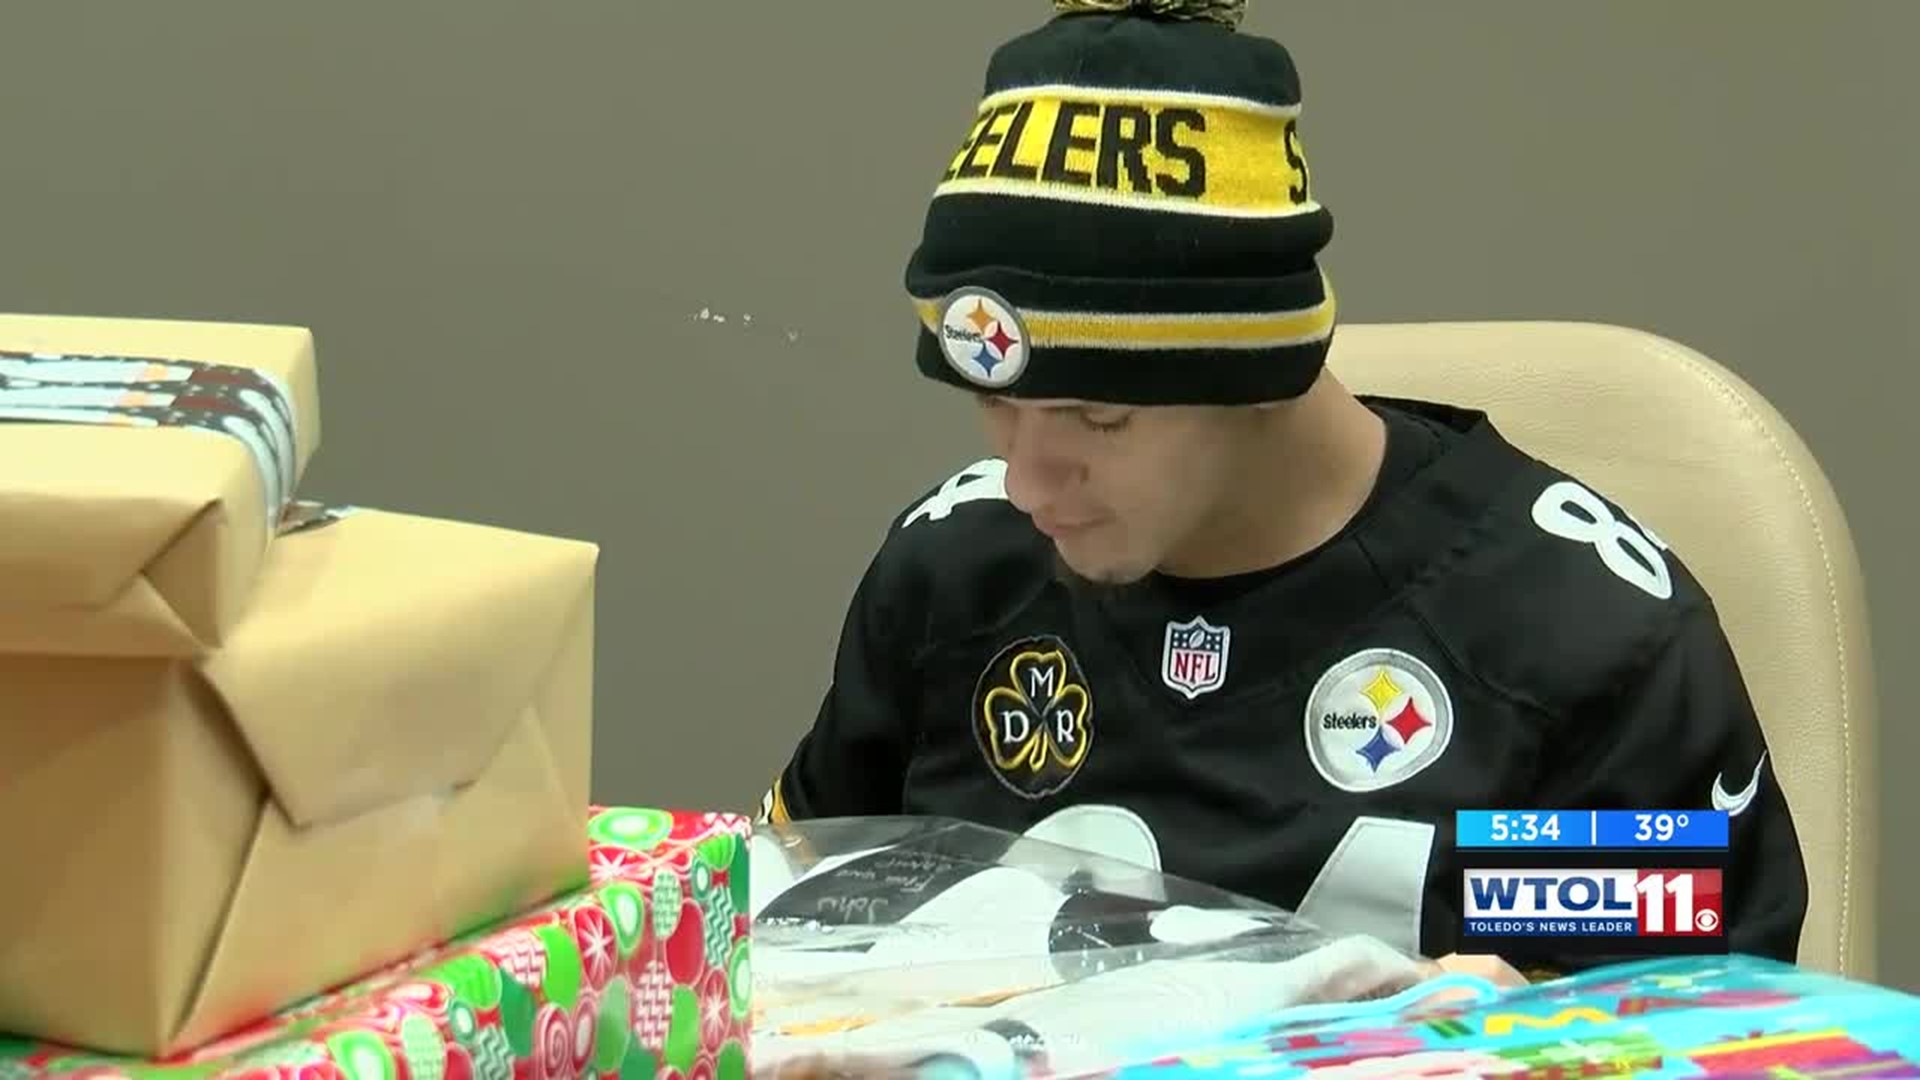 Local cancer patient, Steelers fan gets surprise gift from Hall of Famer